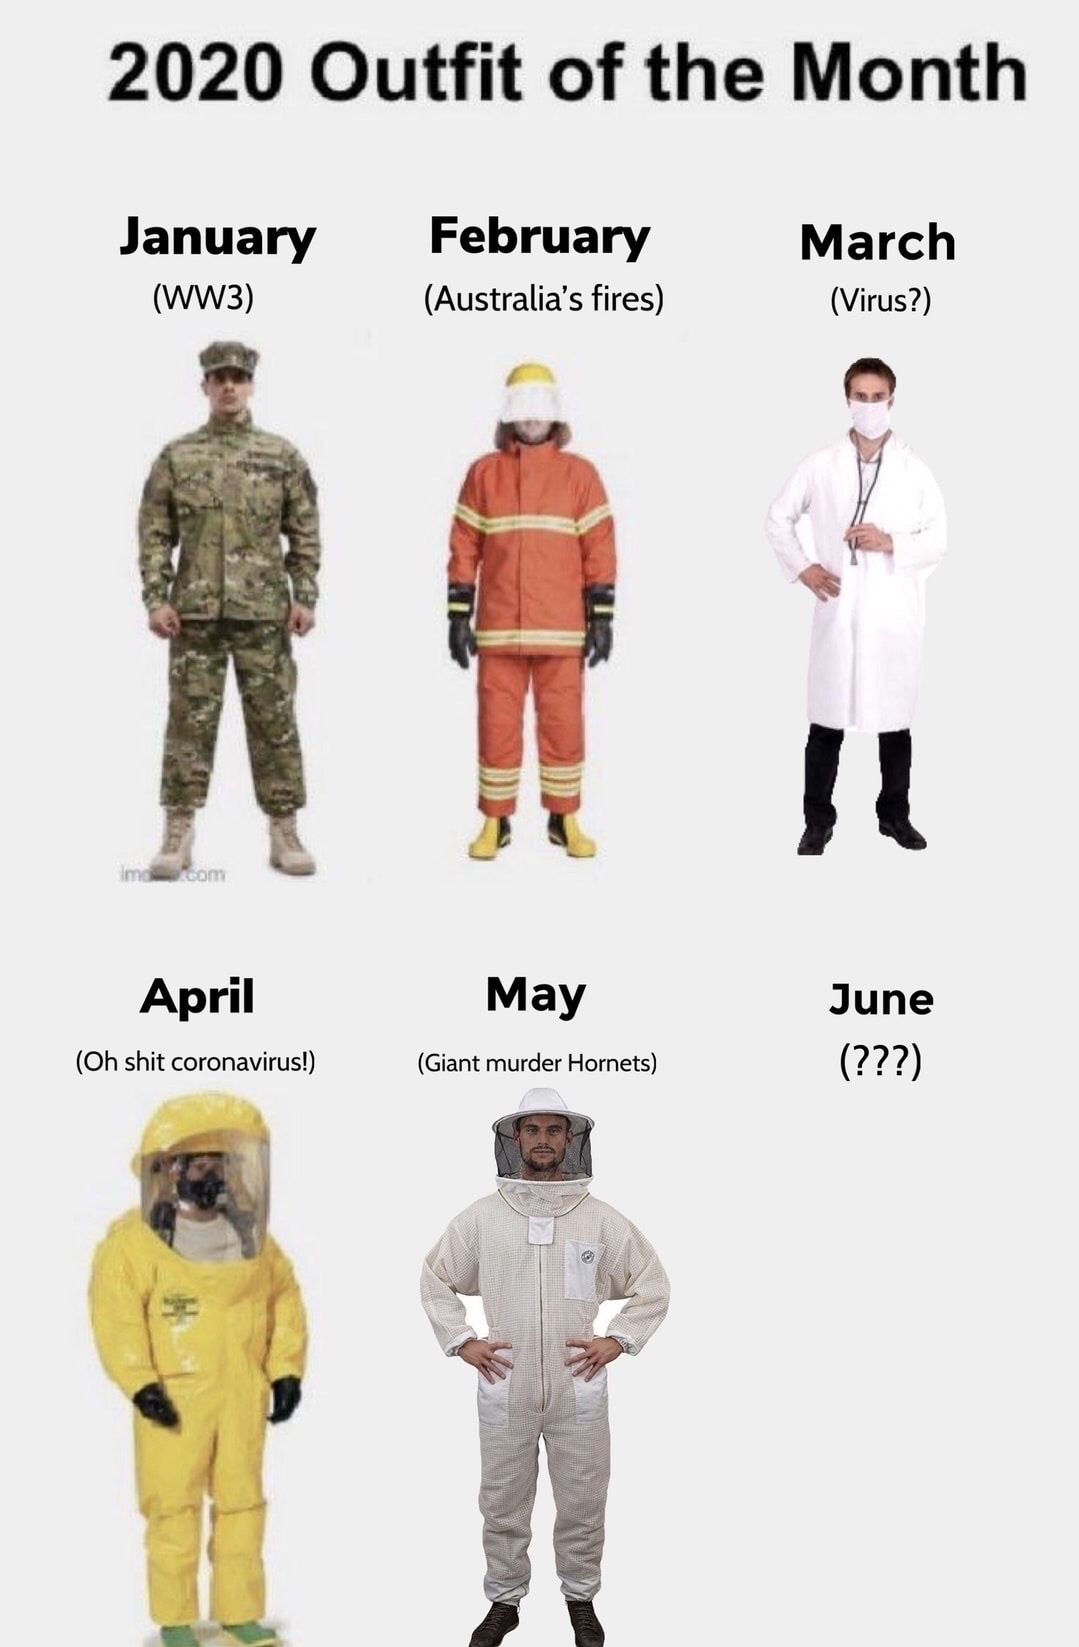 outfits of 2020 meme - 2020 Outfit of the Month January WW3 February Australia's fires March Virus? Nu Imo com April May June ??? Oh shit coronavirus! Giant murder Hornets